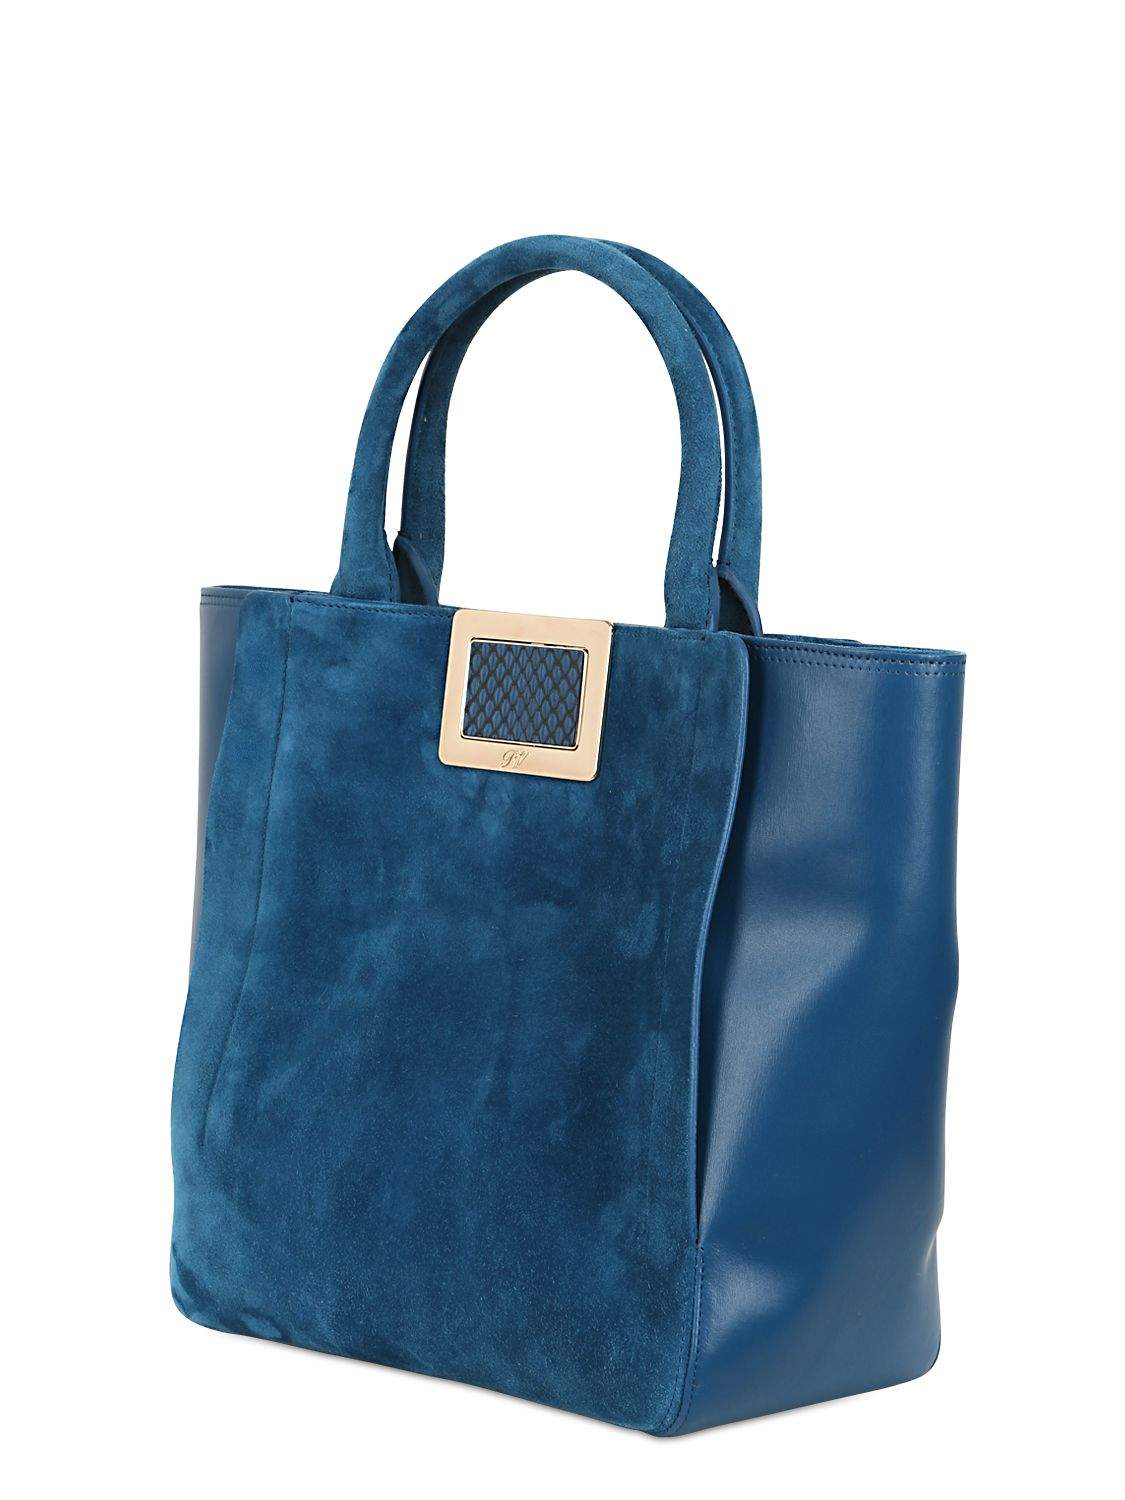 Lyst - Roger Vivier Small Ines Suede Leather Tote Bag in Blue